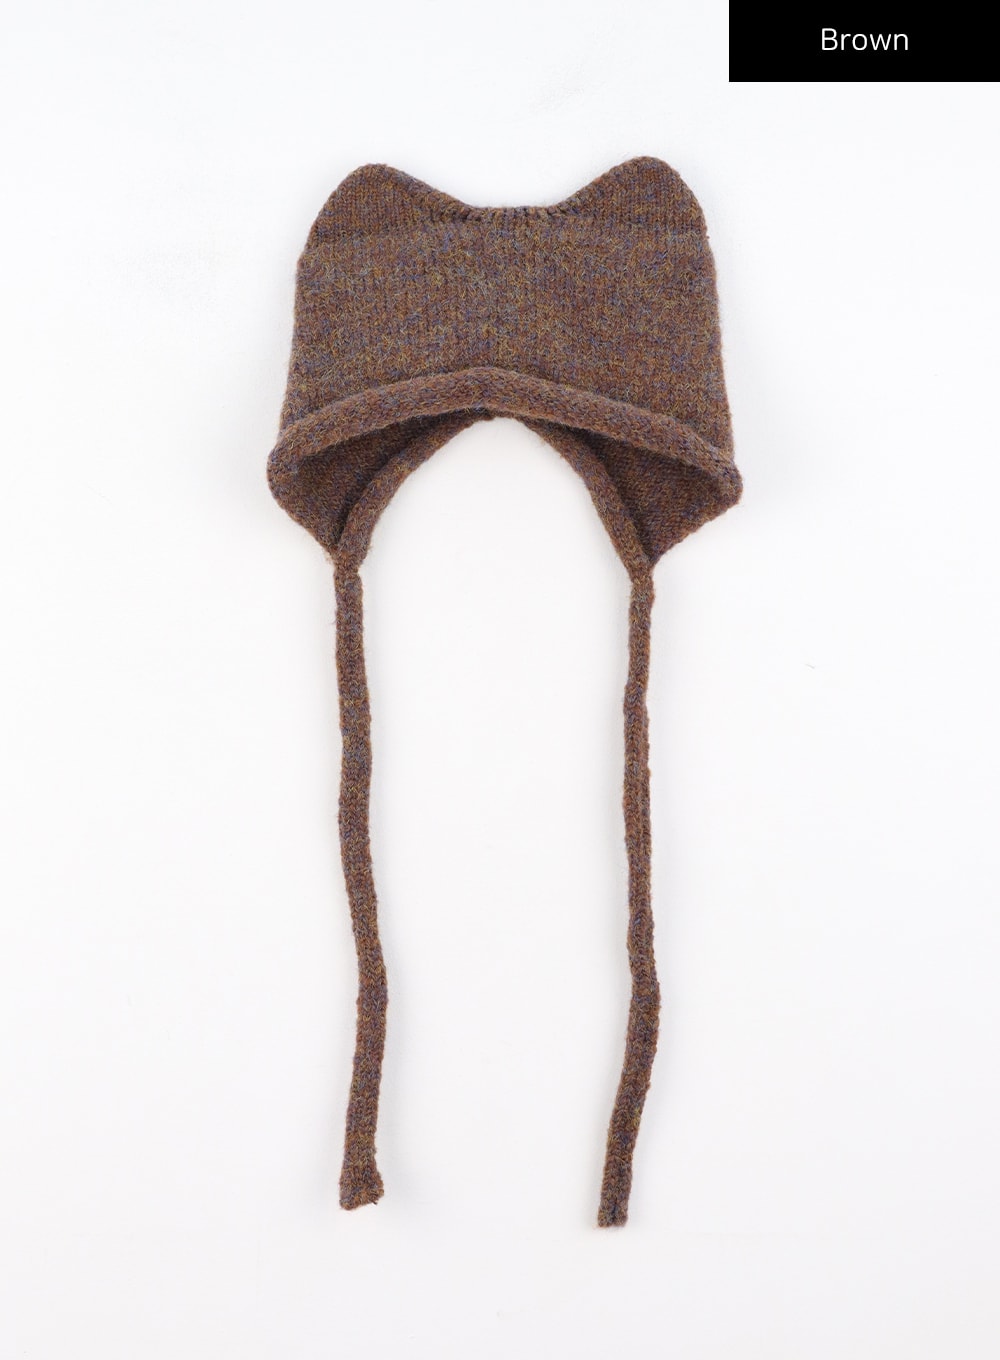 cat-knitted-hat-co327 / Brown